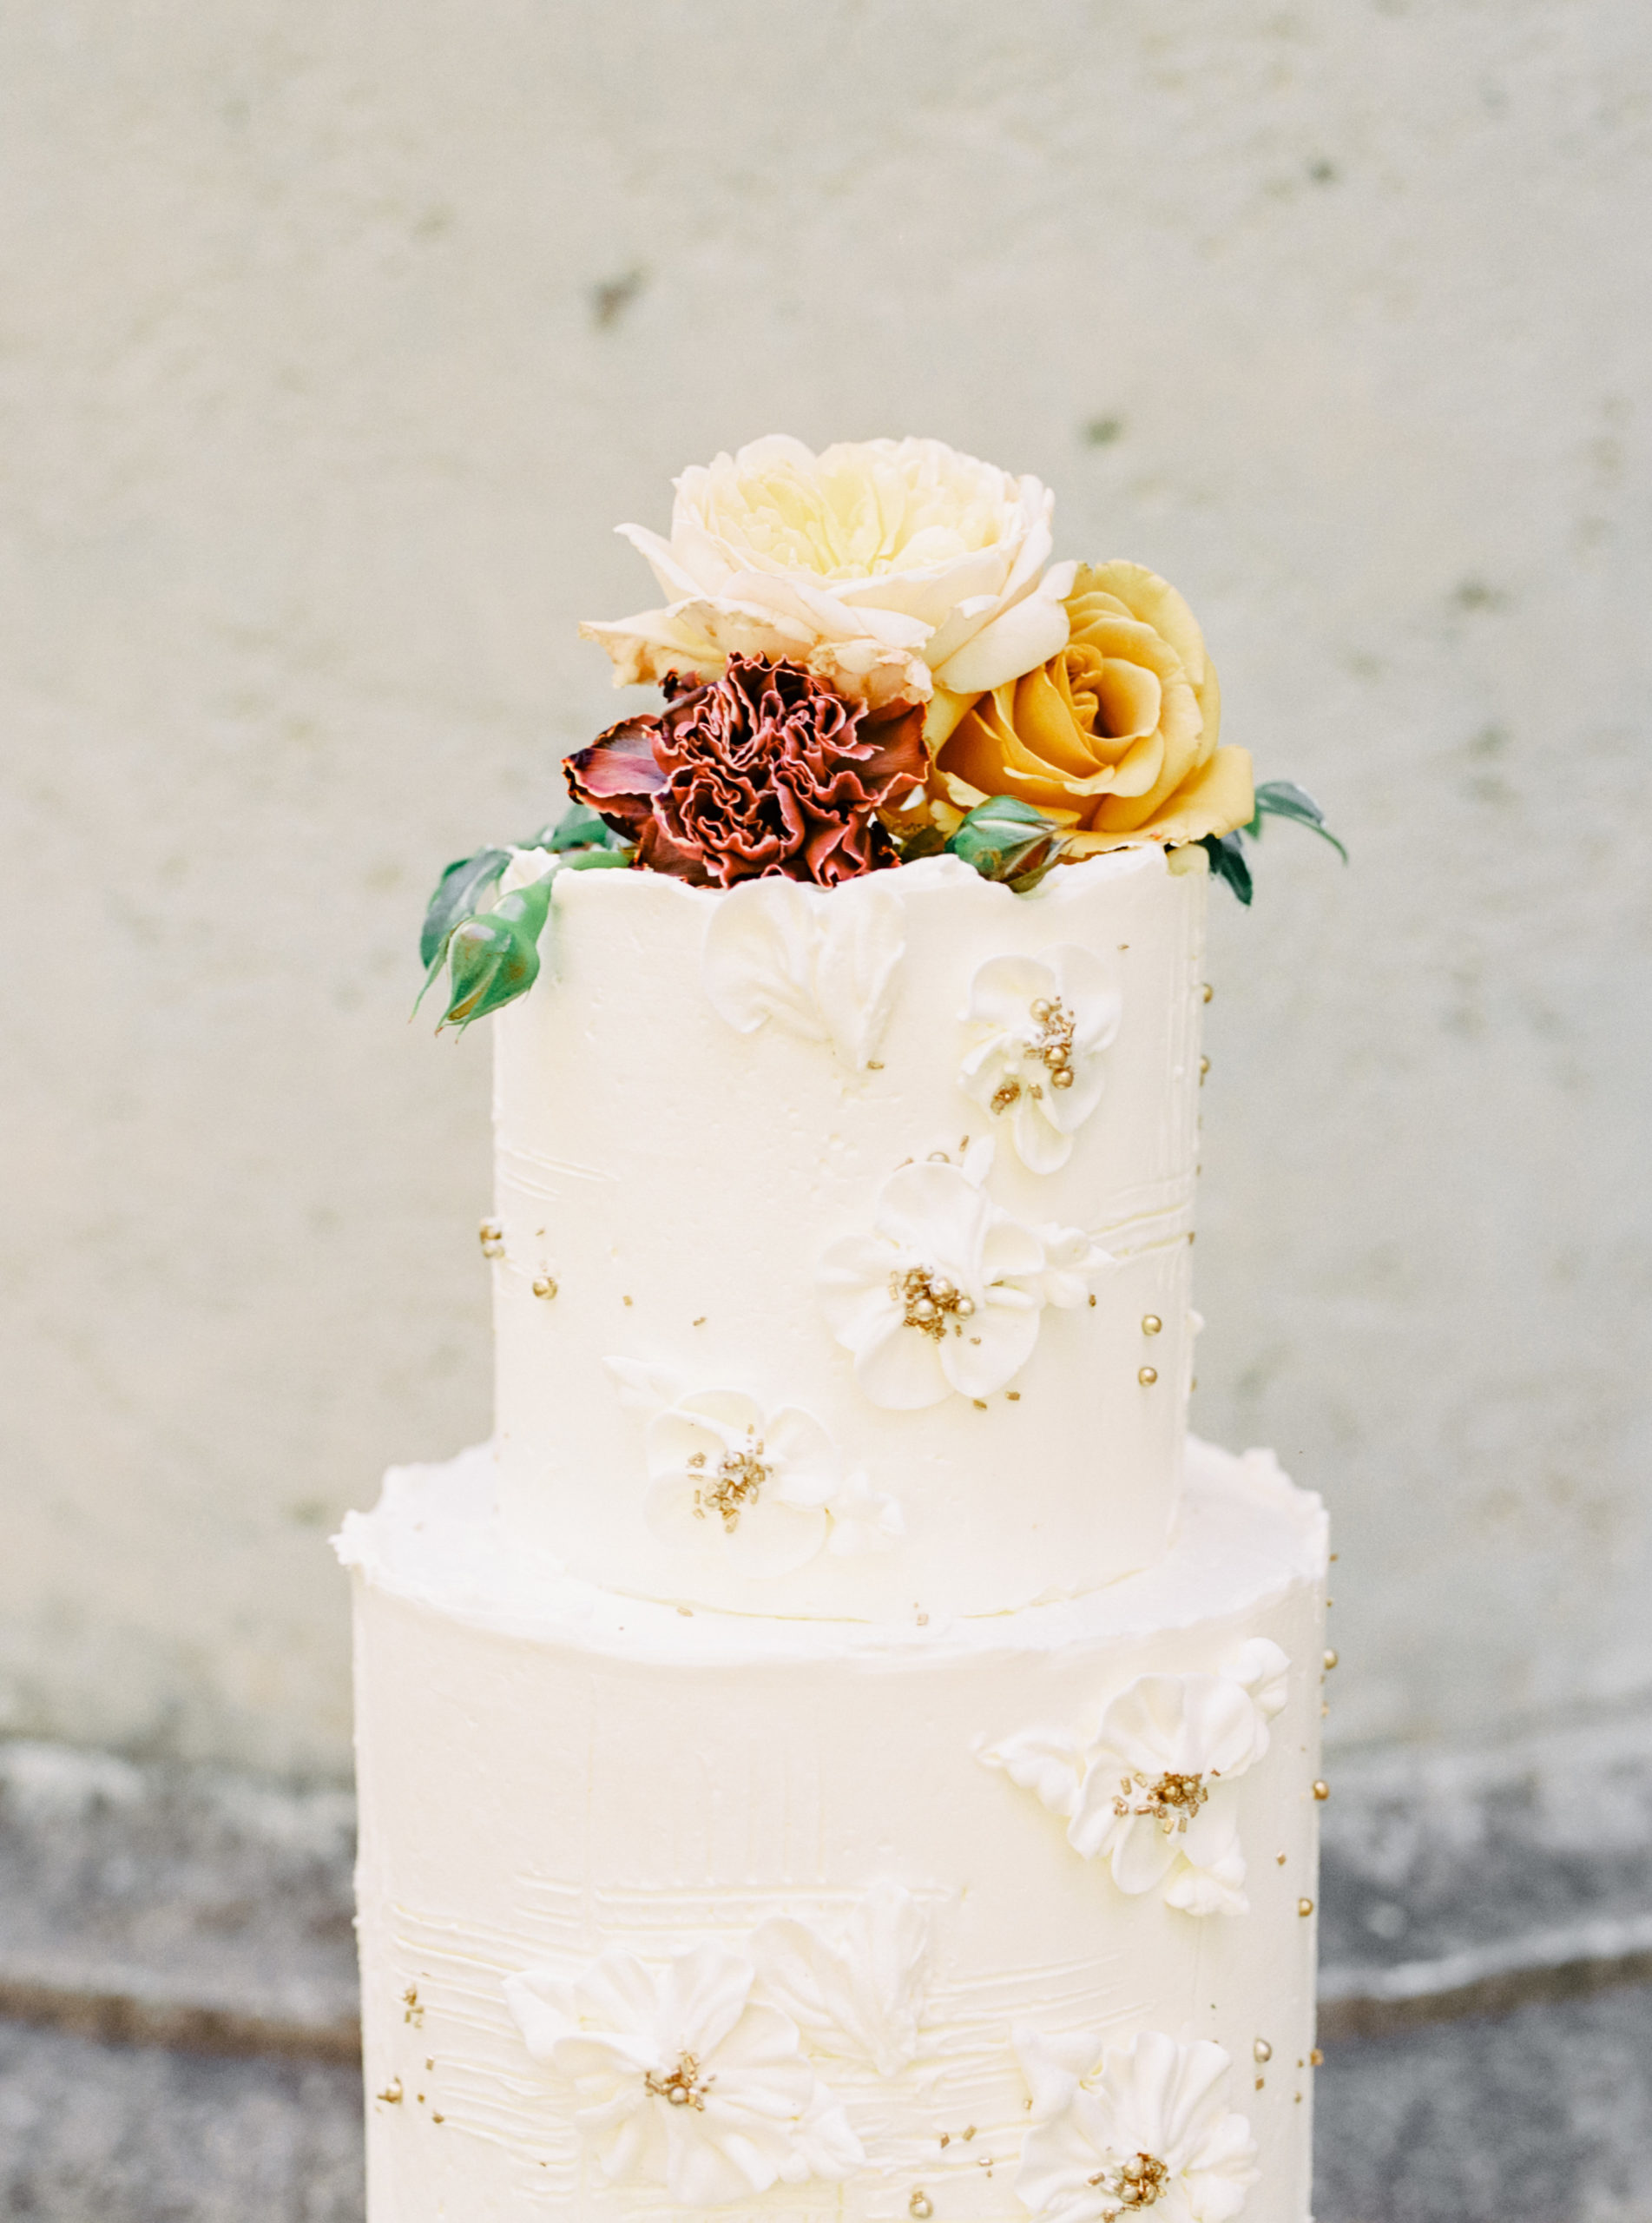 Tiered cream cake topped with flowers by Cake Envy